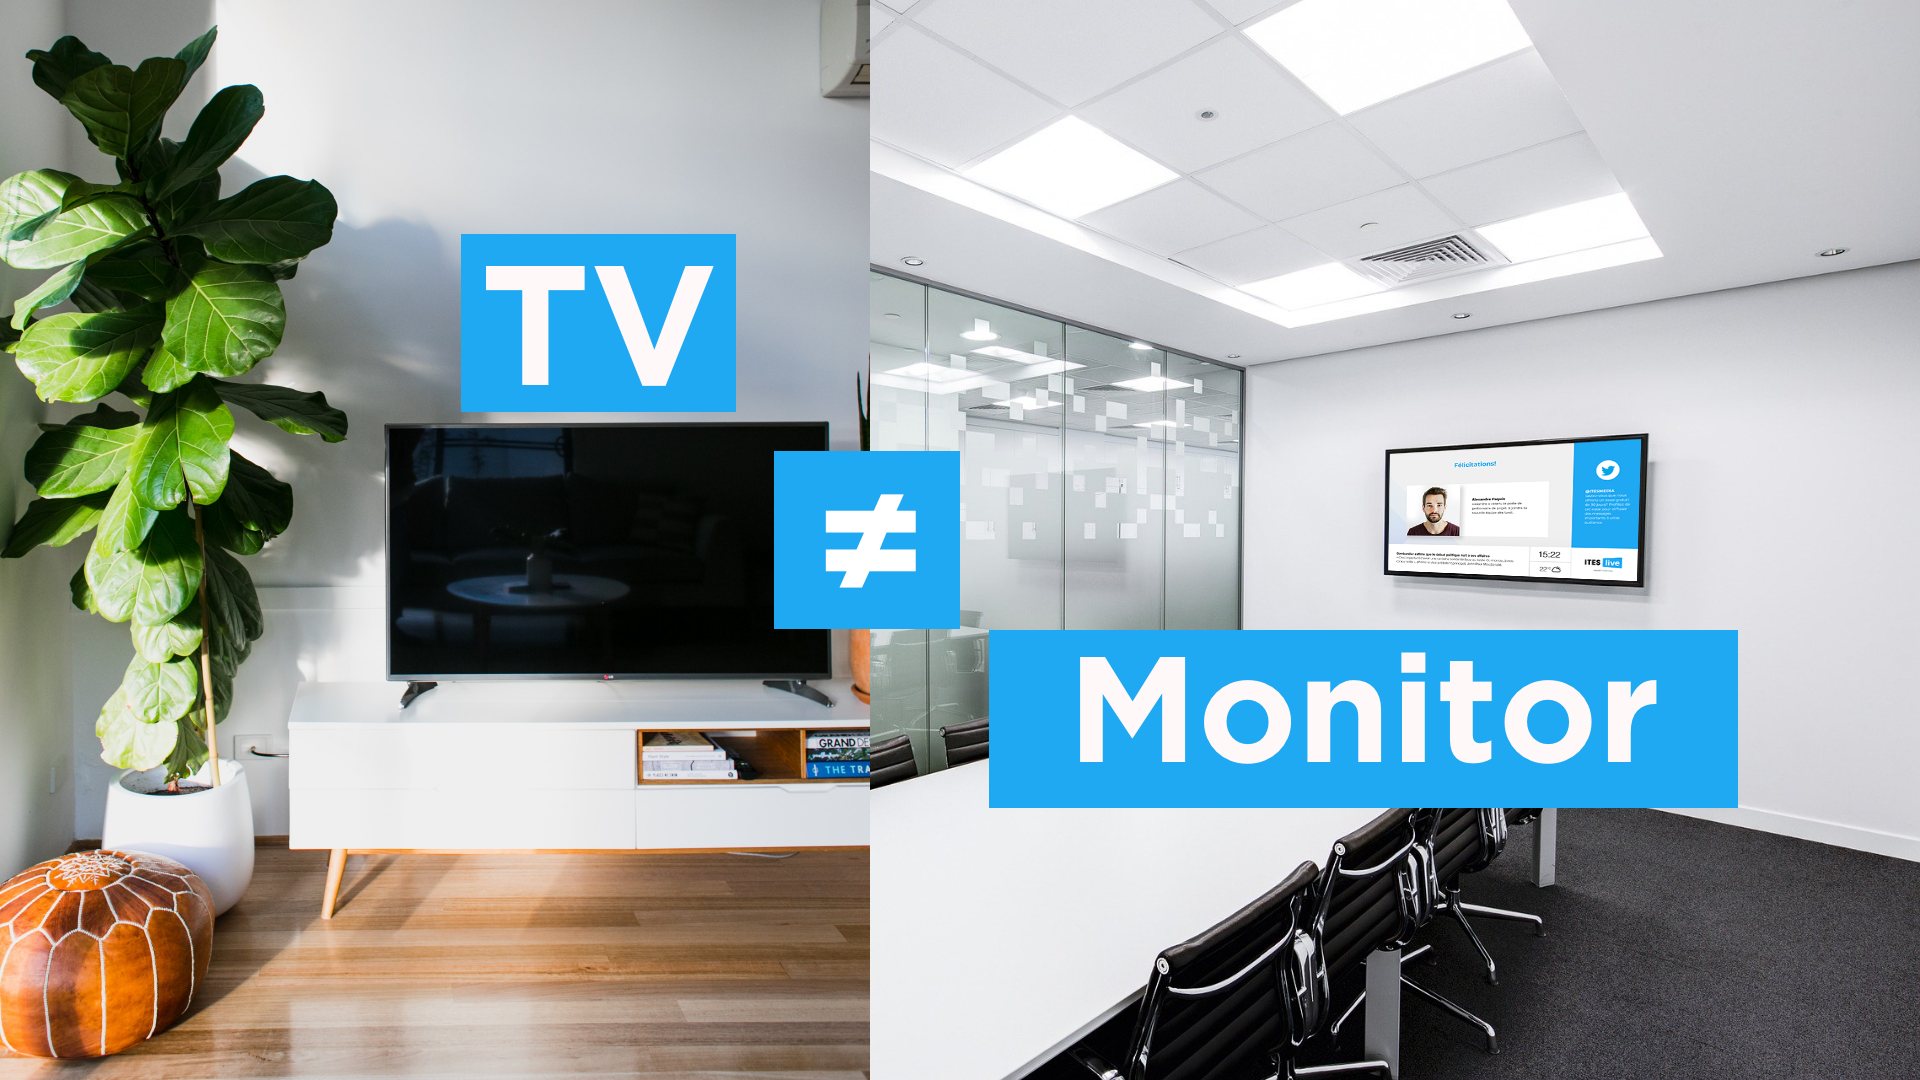 Video - The differences between televisions and digital signage monitors?